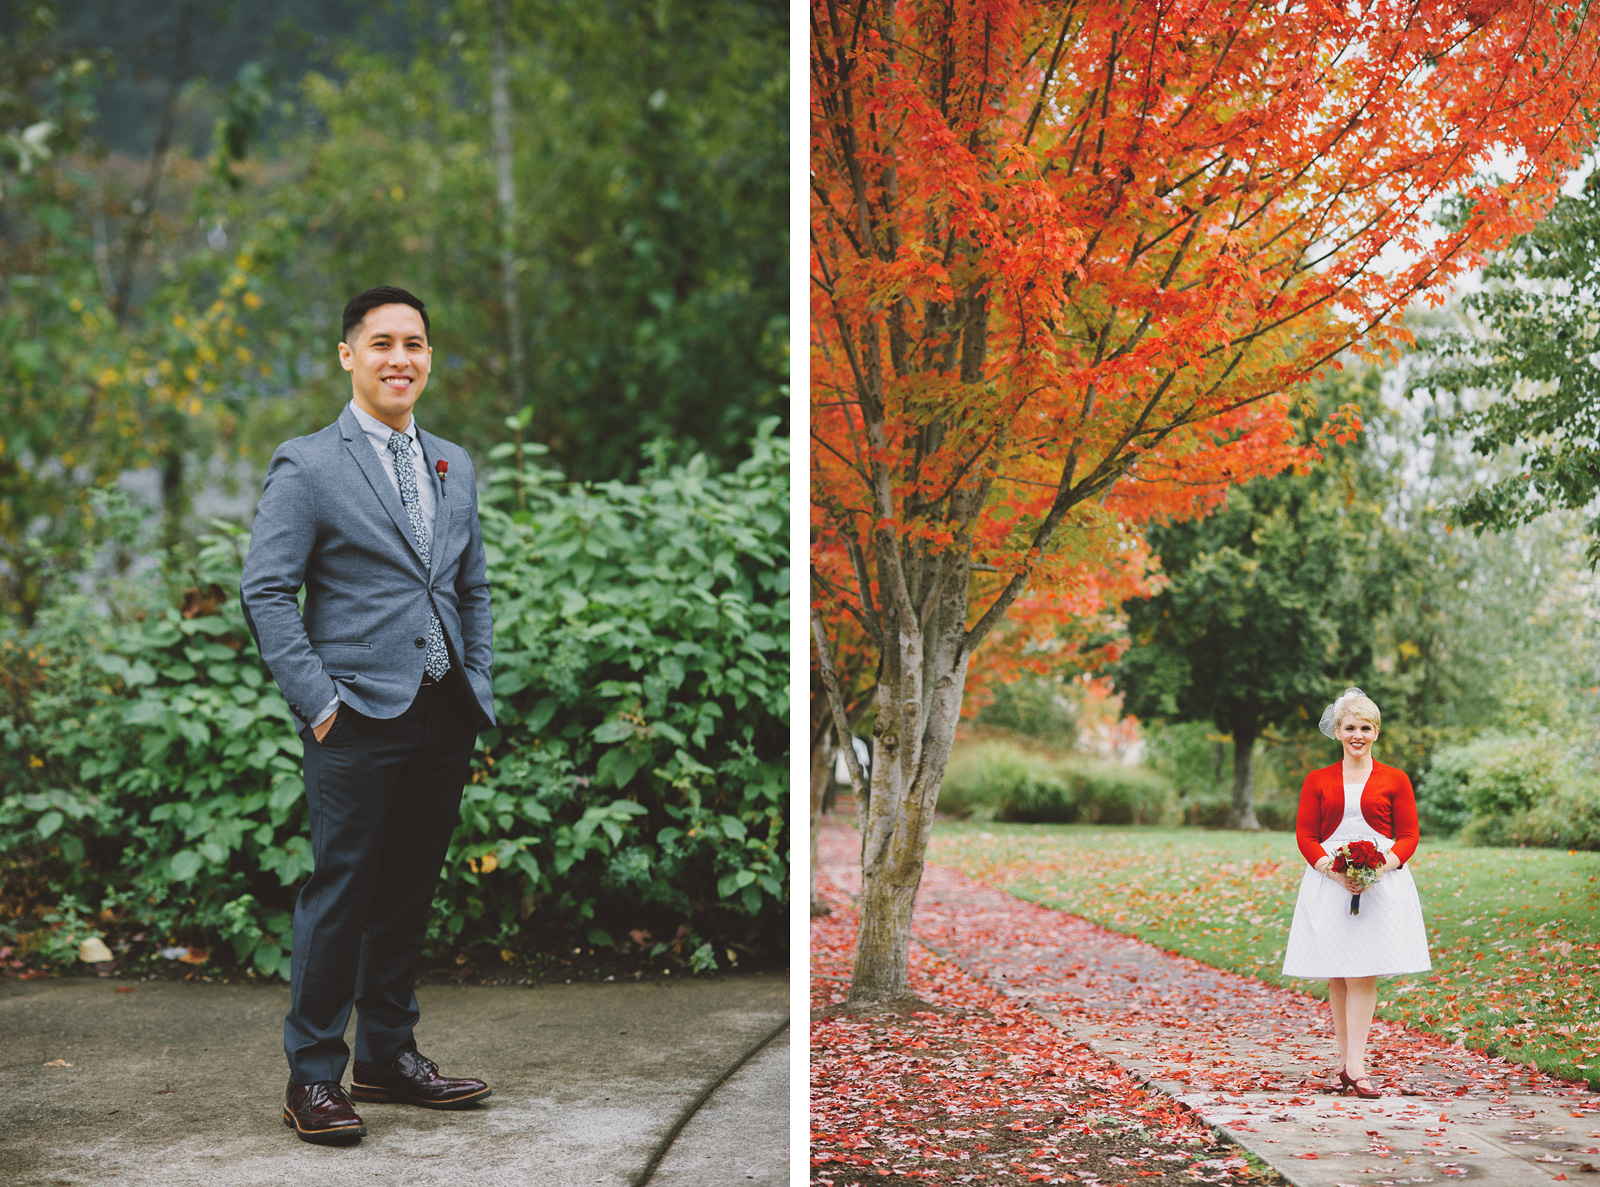 Wedding ortraits in Cathedral Park | Portland Oregon Elopement